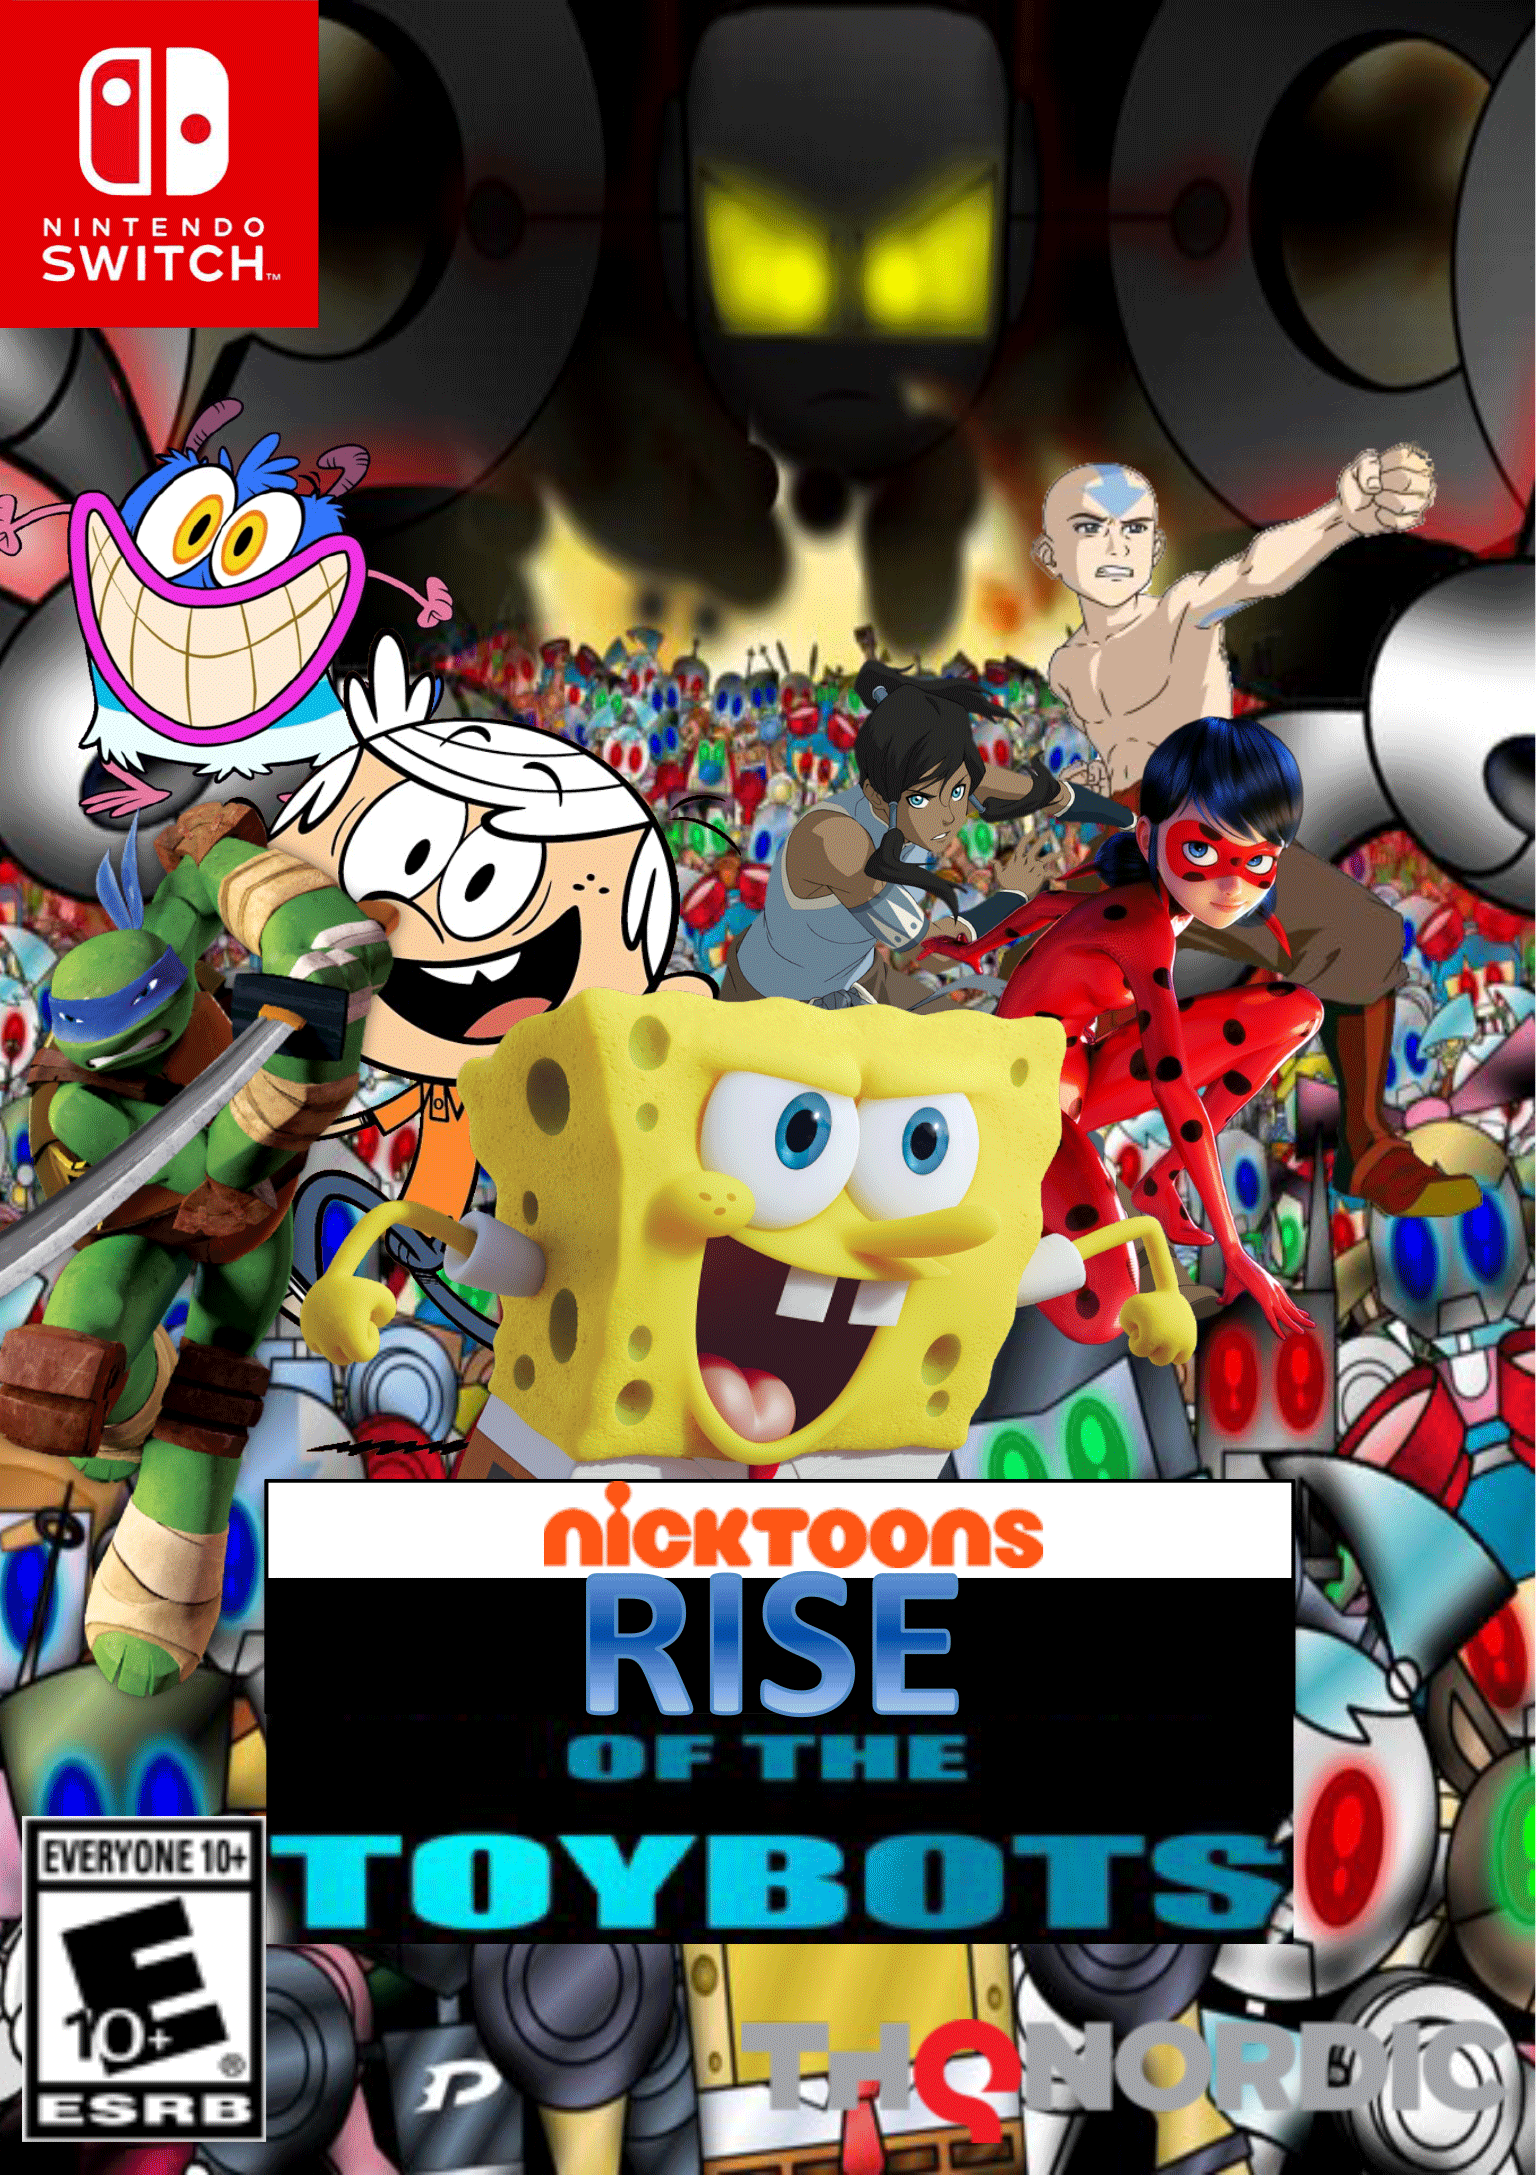 Nicktoons: Rise of the Toybots | Video Game Fanon Wiki | FANDOM powered by Wikia1537 x 2175